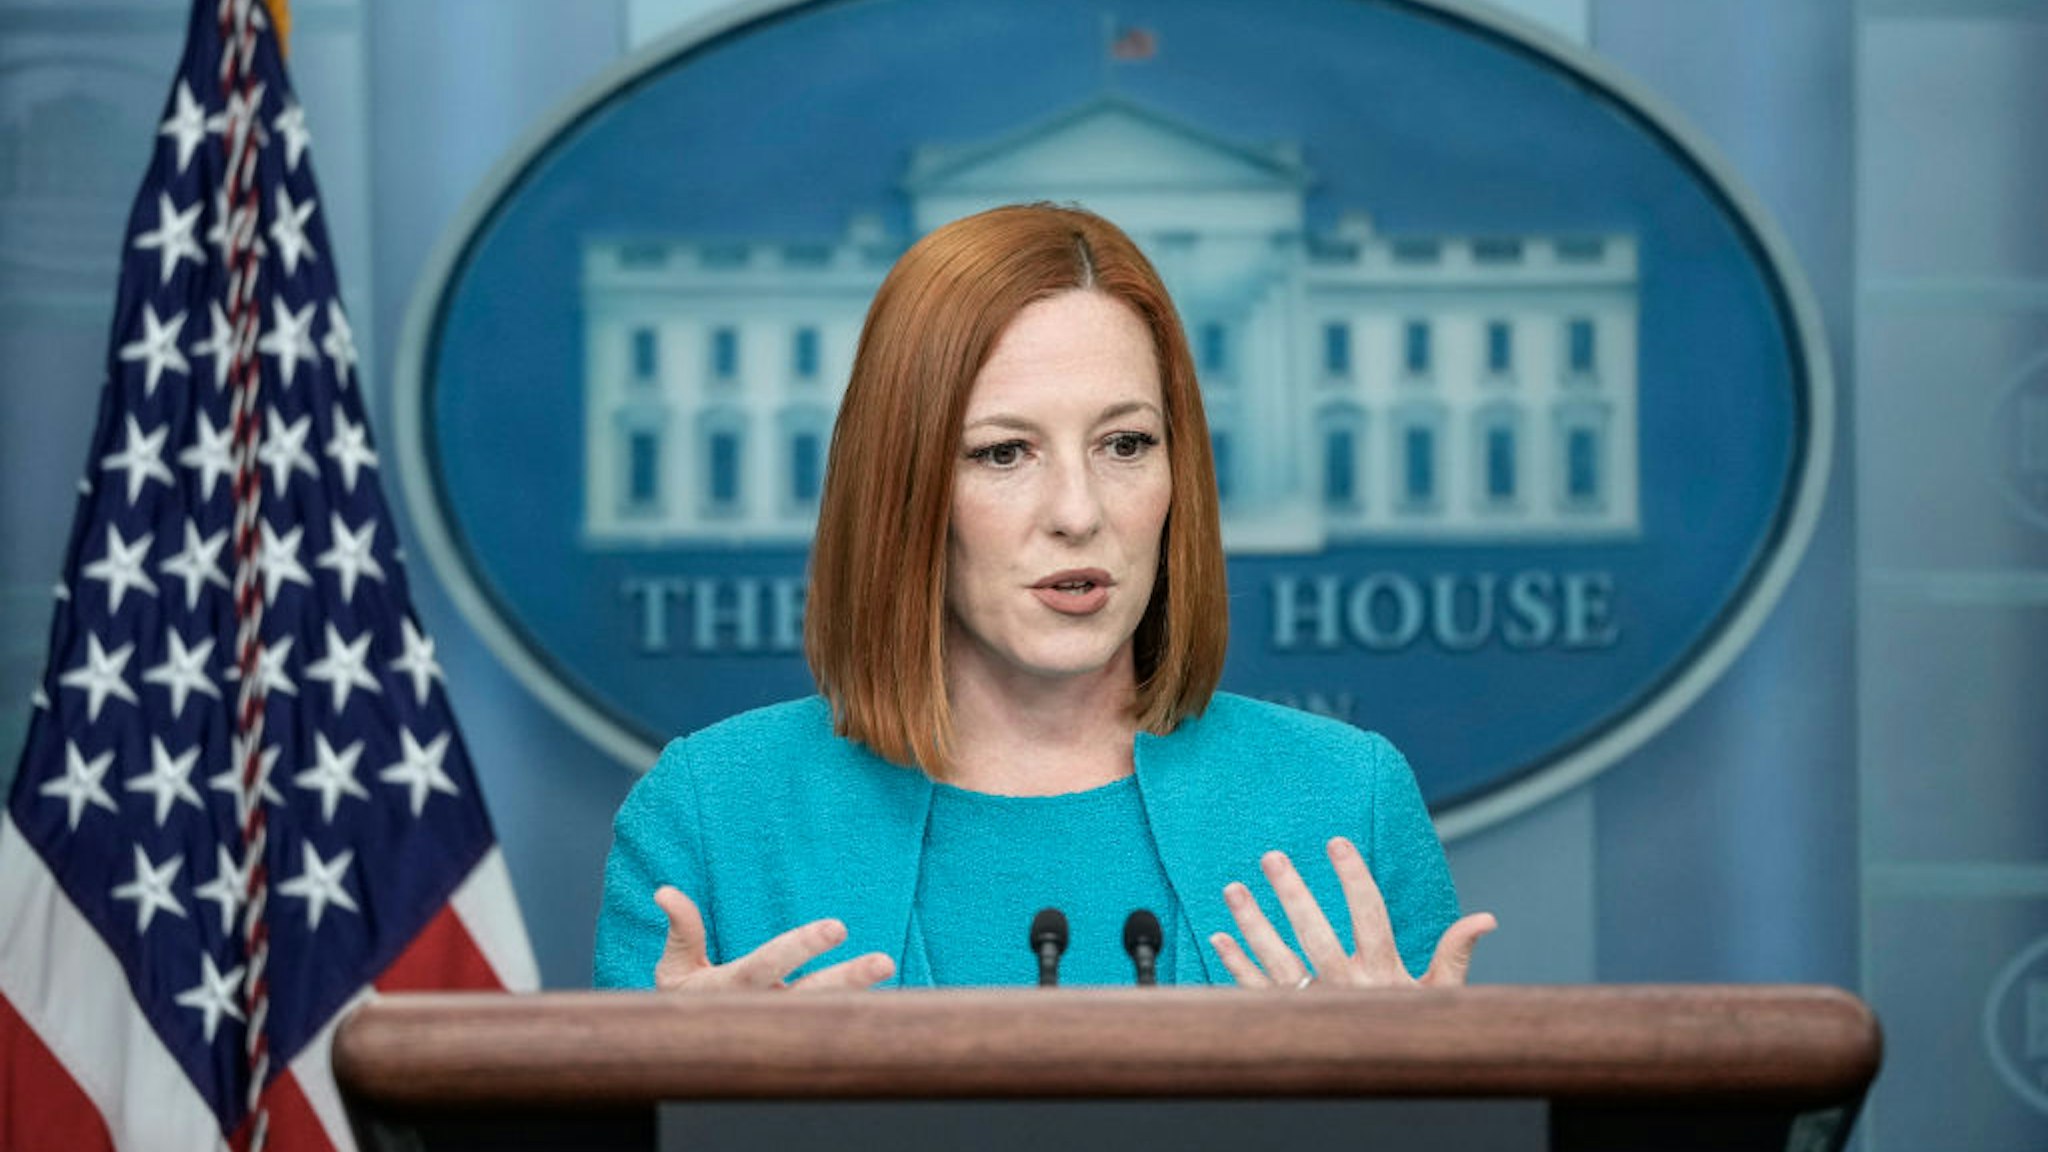 WASHINGTON, DC - MAY 9: White House Press Secretary Jen Psaki speaks during the daily press briefing at the White House May 9, 2022 in Washington, DC. Psaki fielded a wide range of questions, including the Russian invasion of Ukraine, the Supreme Court and abortion, and inflation. (Photo by Drew Angerer/Getty Images)